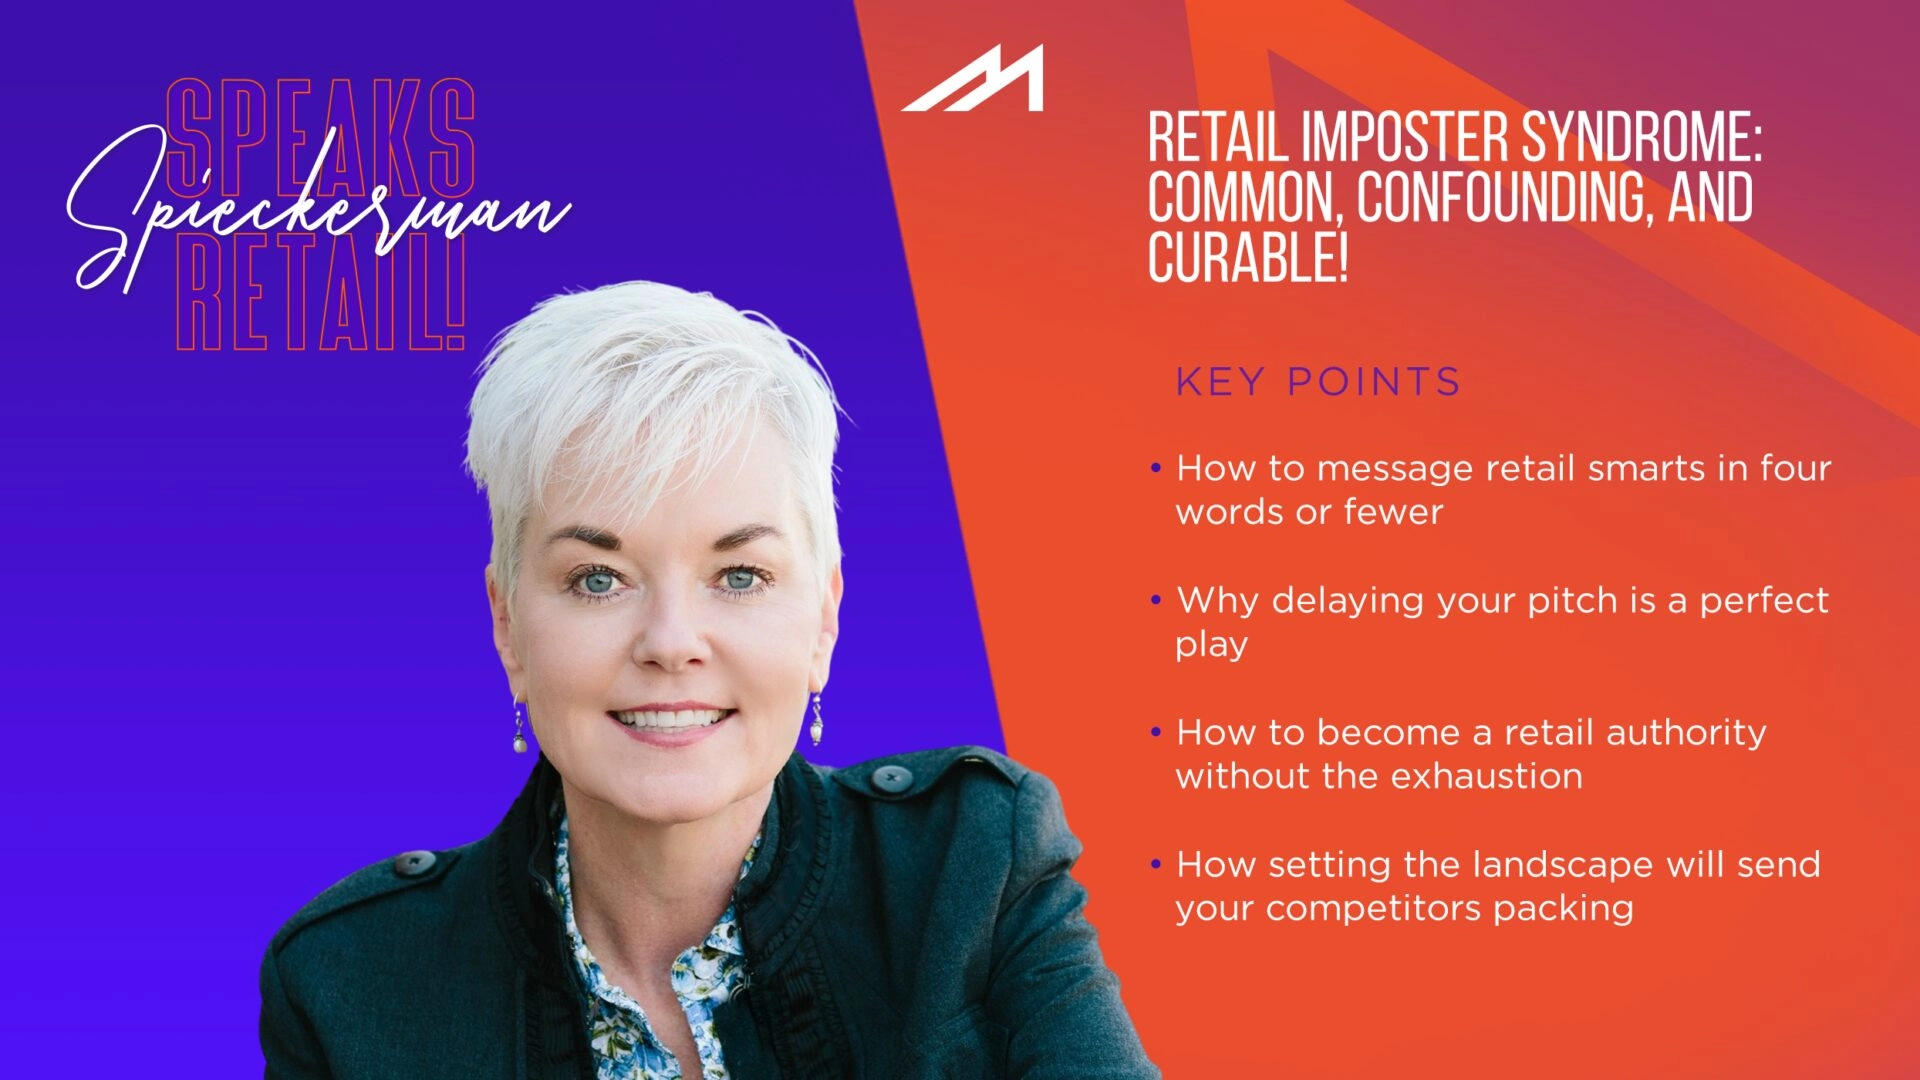 Retail Imposter Syndrome: Common, Confounding, and Curable!